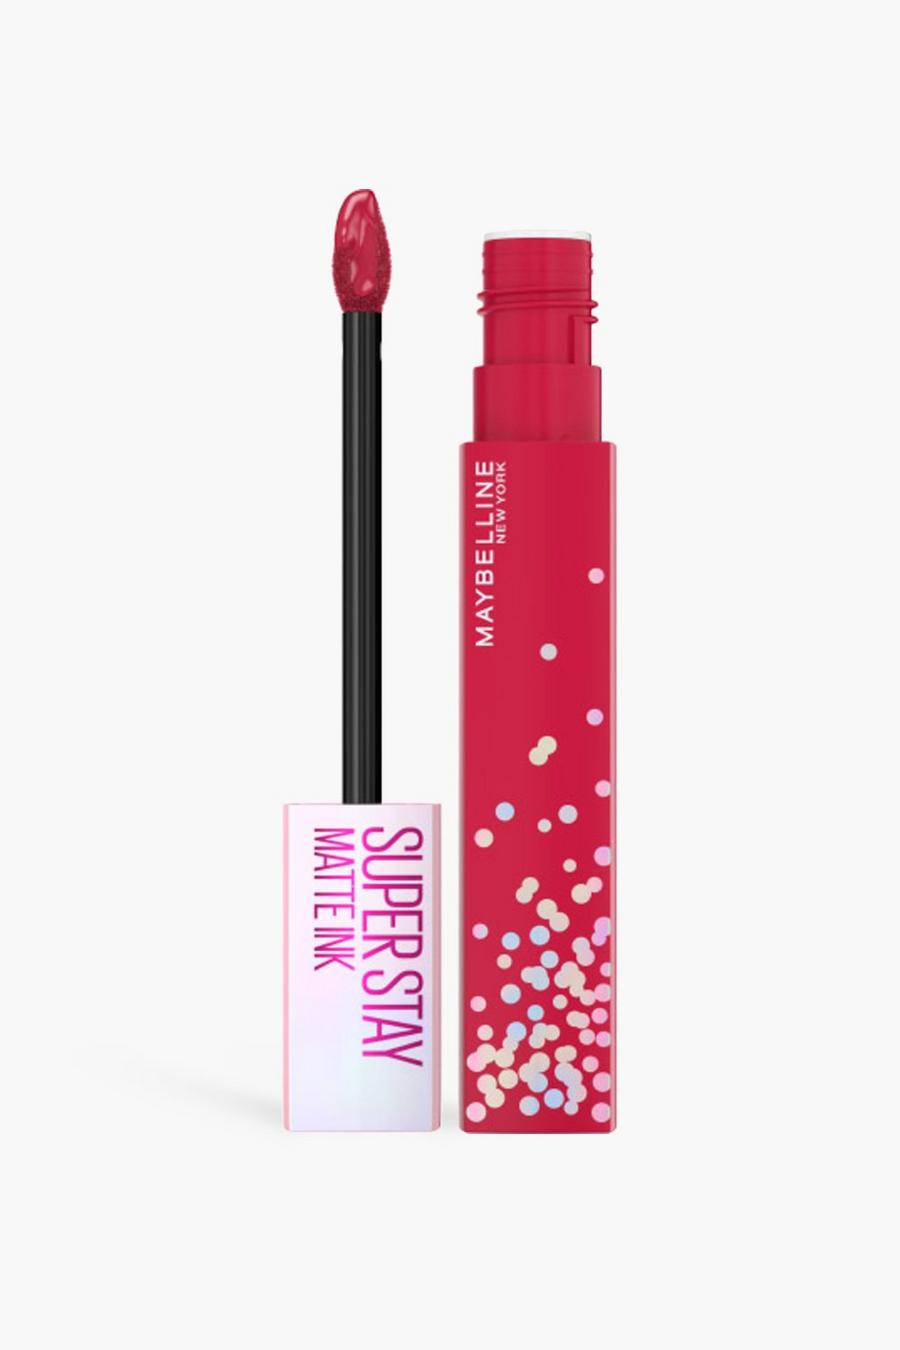 Maybelline SuperStay Matte Ink Pink Liquid Lippenstift Birthday Edition - Life Of The Party, Coral pink